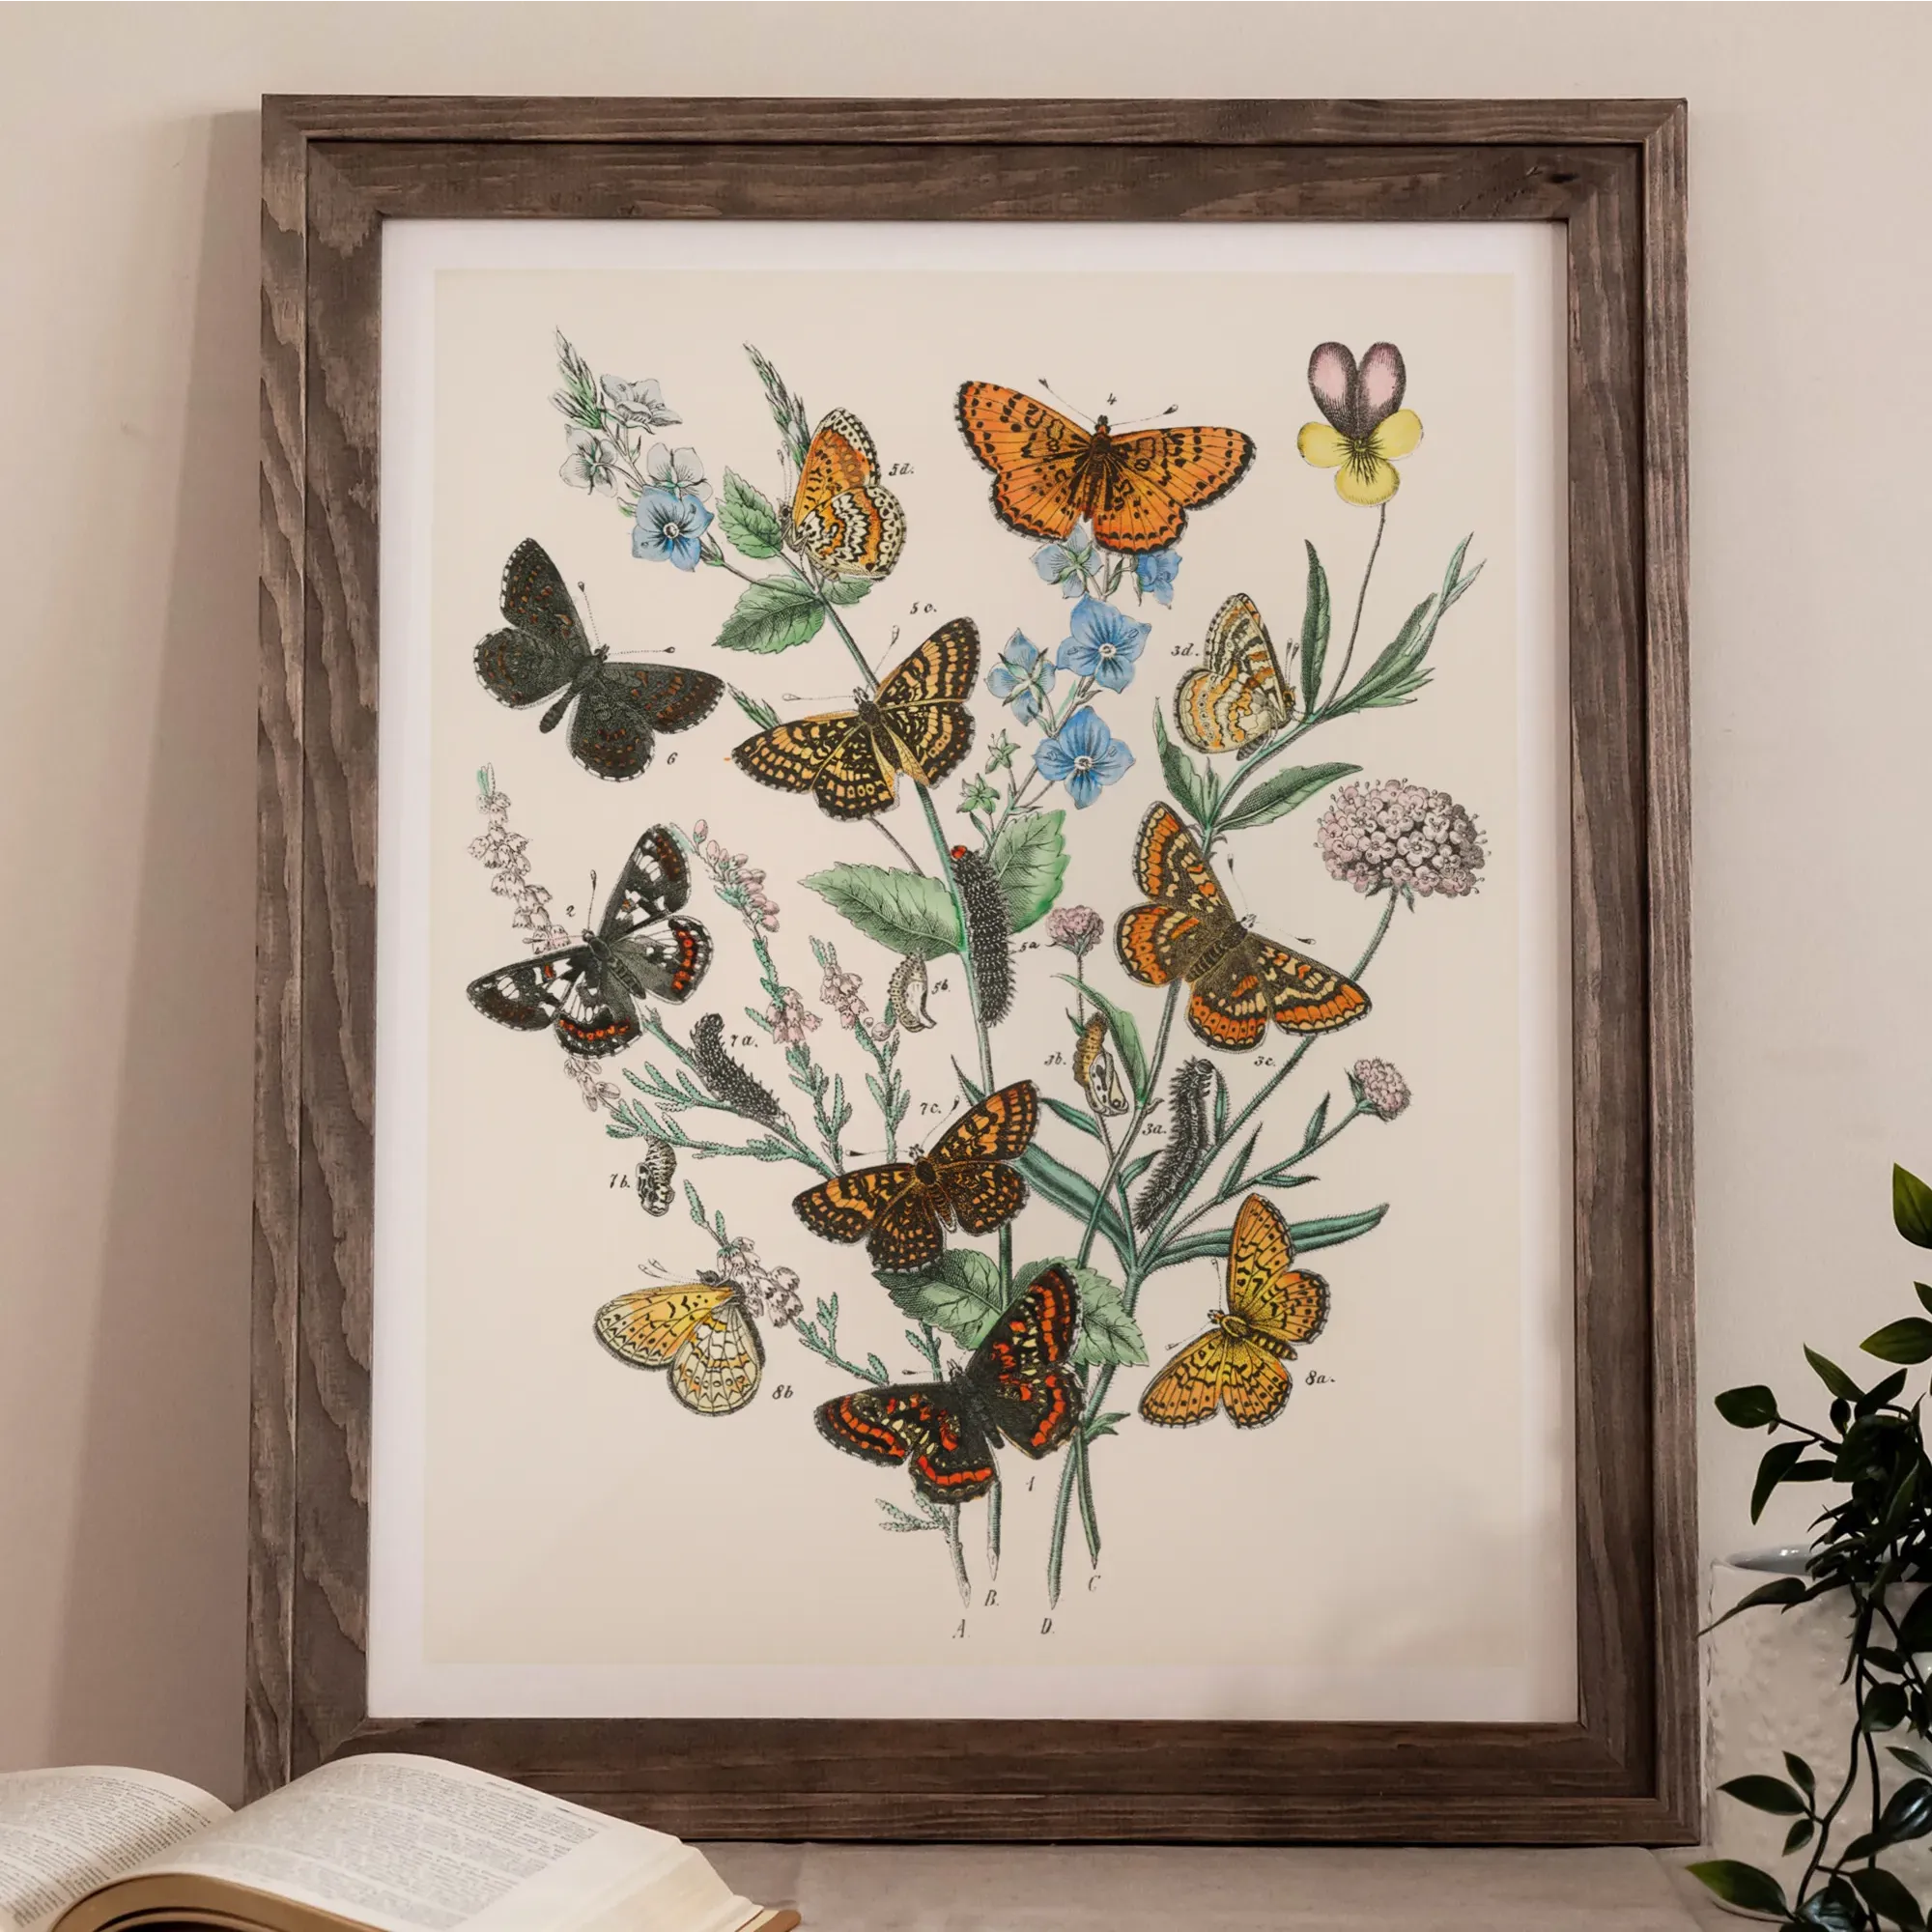 European Butterflies And Moths 2 - William Forsell Kirby Fine Art Print - 16’x20’ - Posters Prints & Visual Artwork